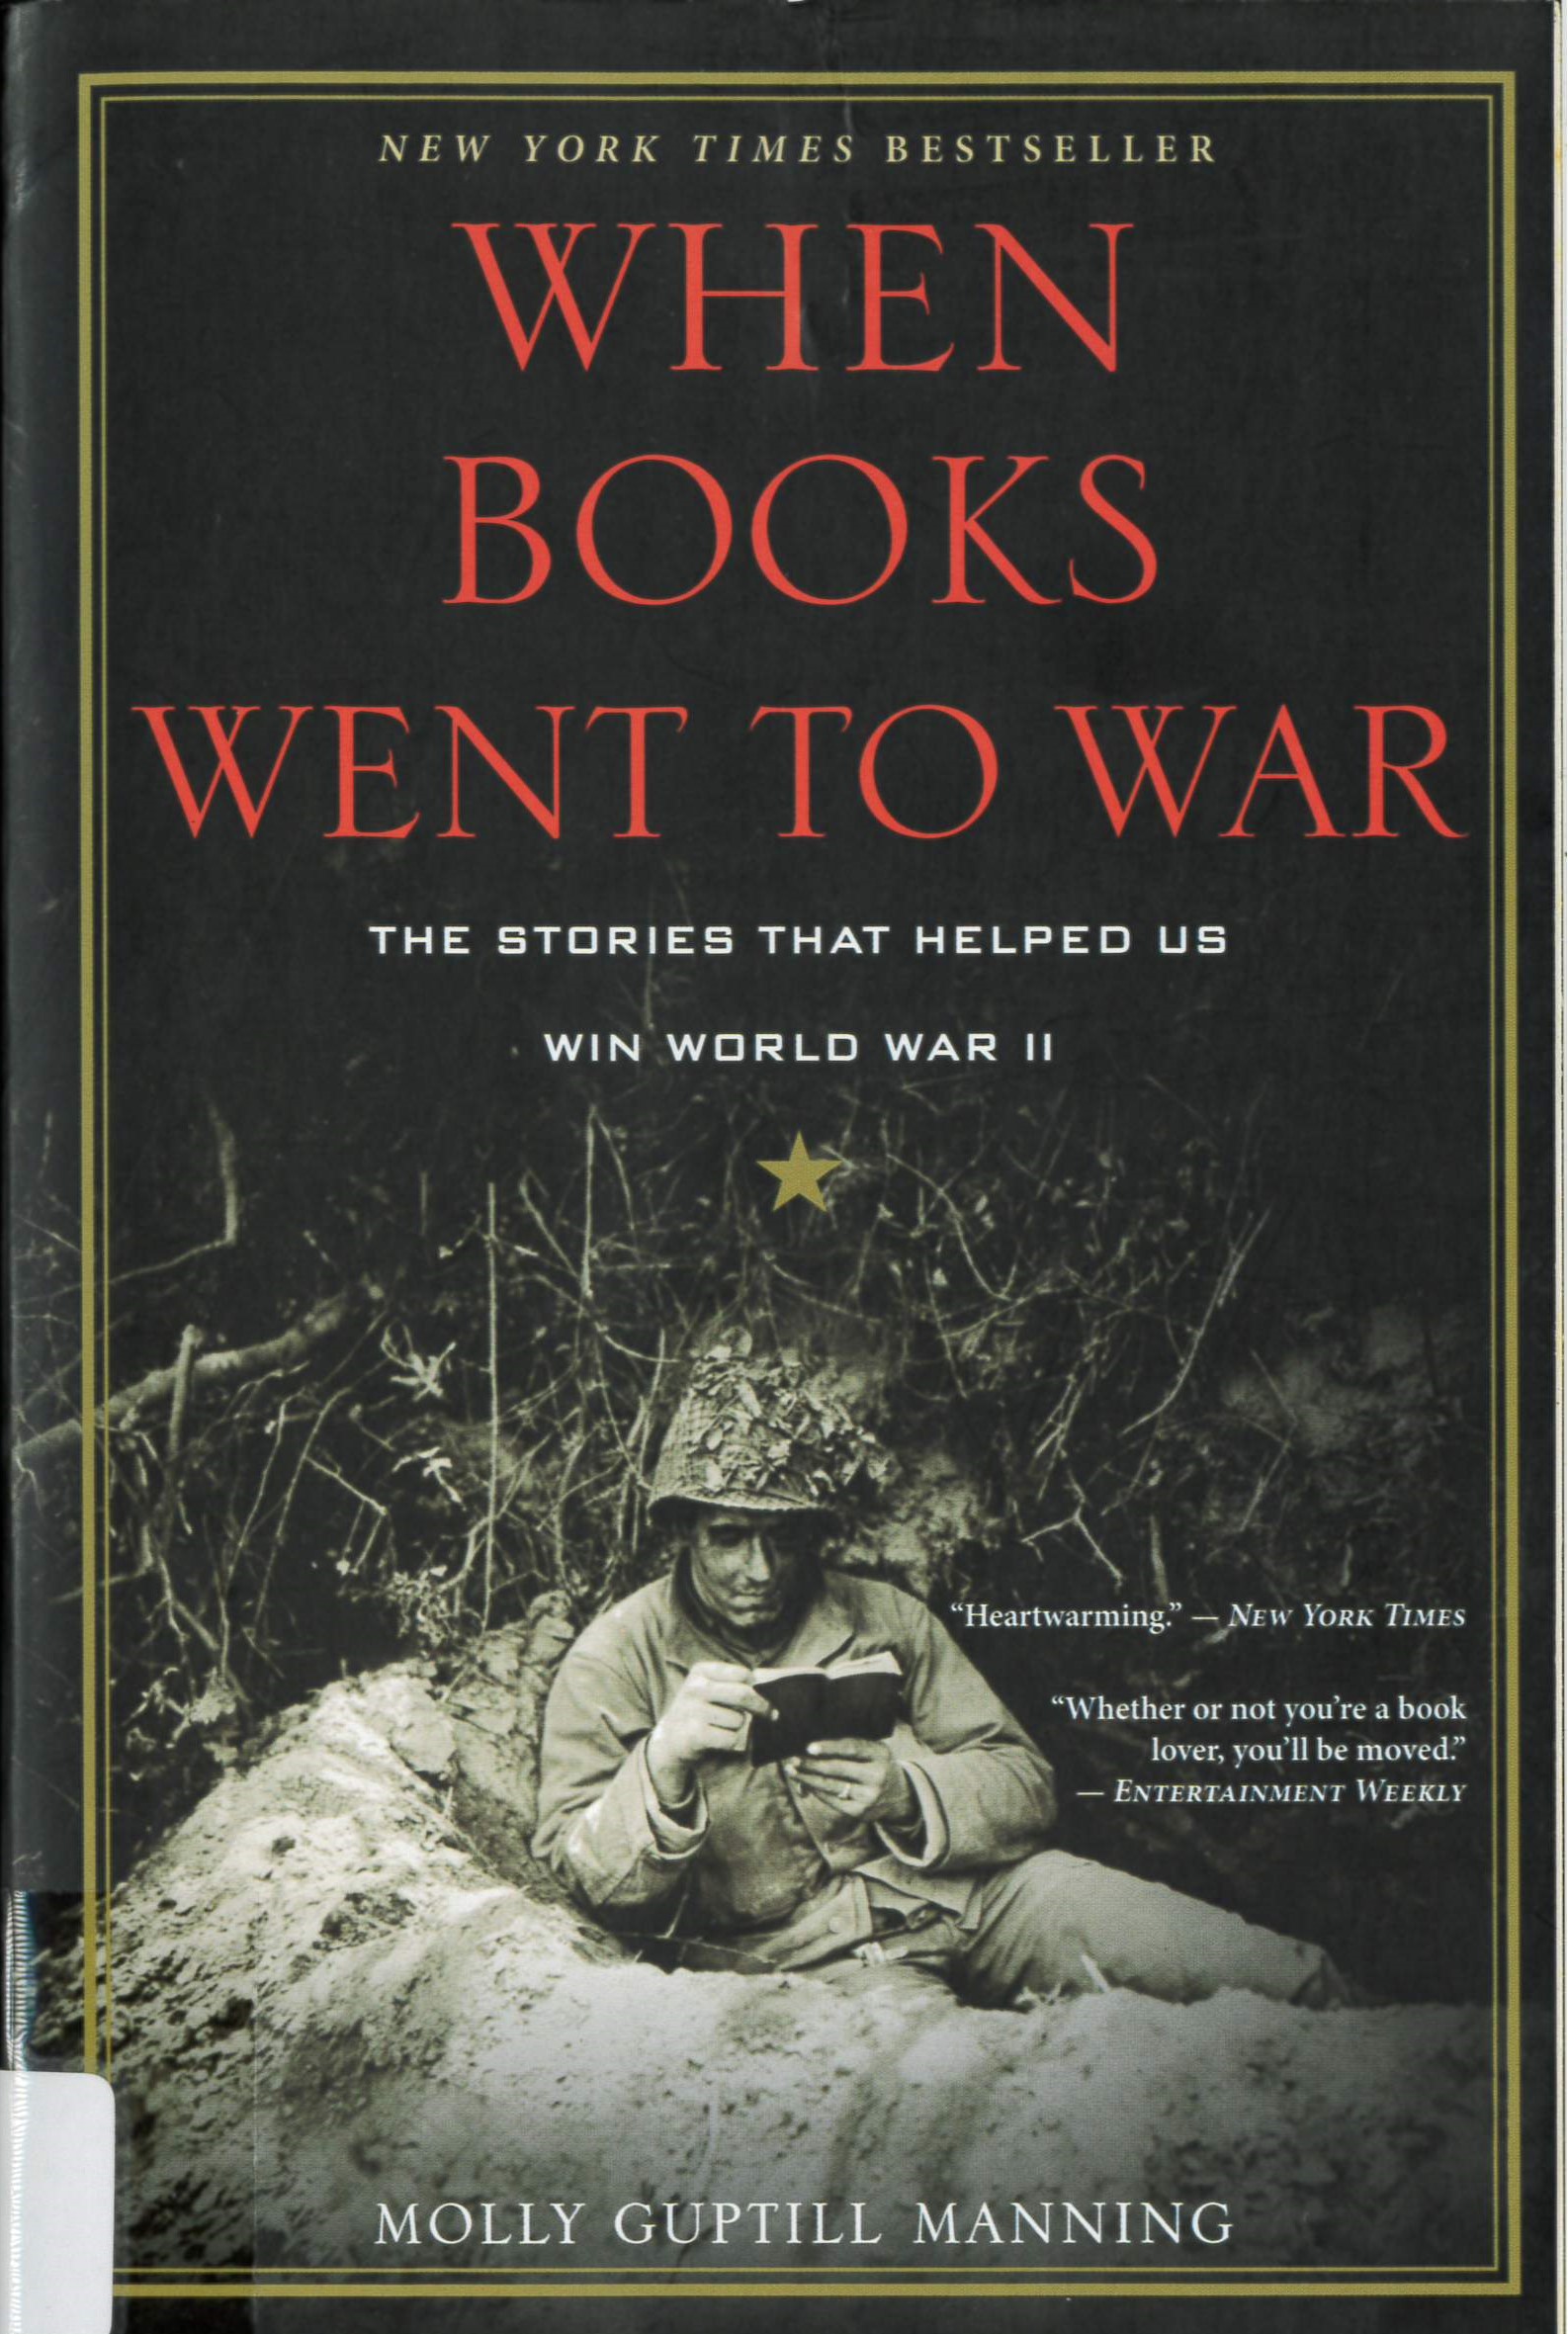 When books went to war the stories that helped us win World War II